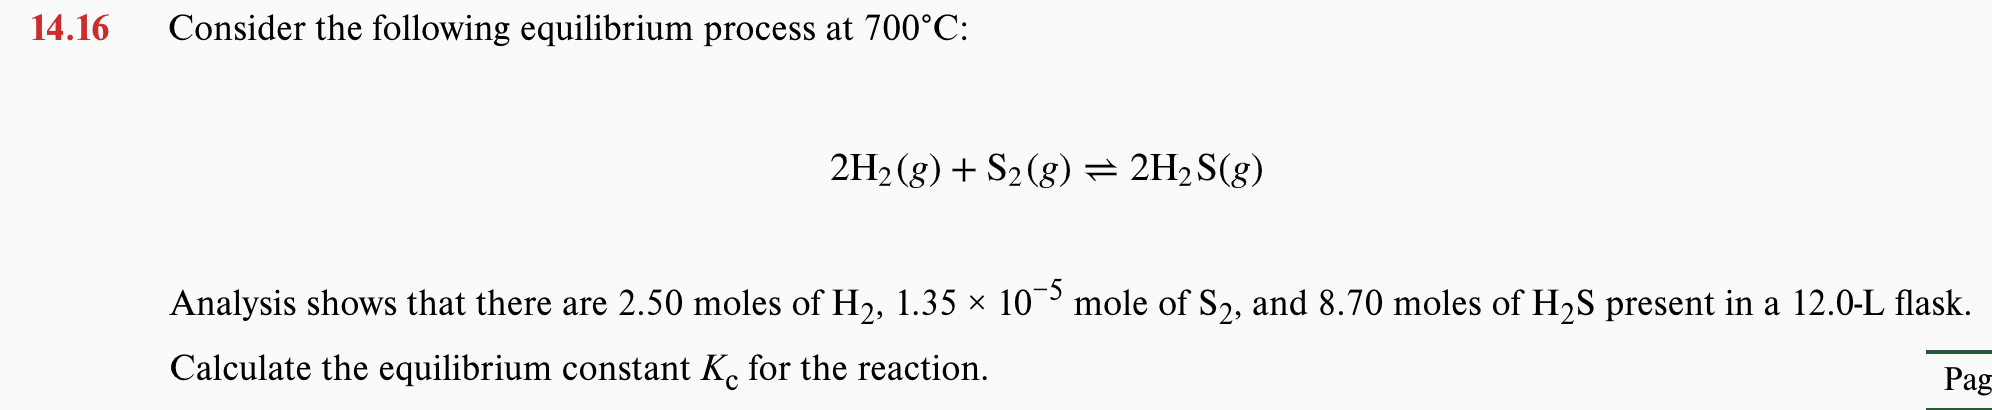 14.16
Consider the following equilibrium process at 700°C:
2H2 (g) + S2(g)= 2H2S(g)
Analysis shows that there are 2.50 moles of H2, 1.35 × 10 mole of S2, and 8.70 moles of H2S present in a 12.0-L flask.
Calculate the equilibrium constant K. for the reaction.
Pag
